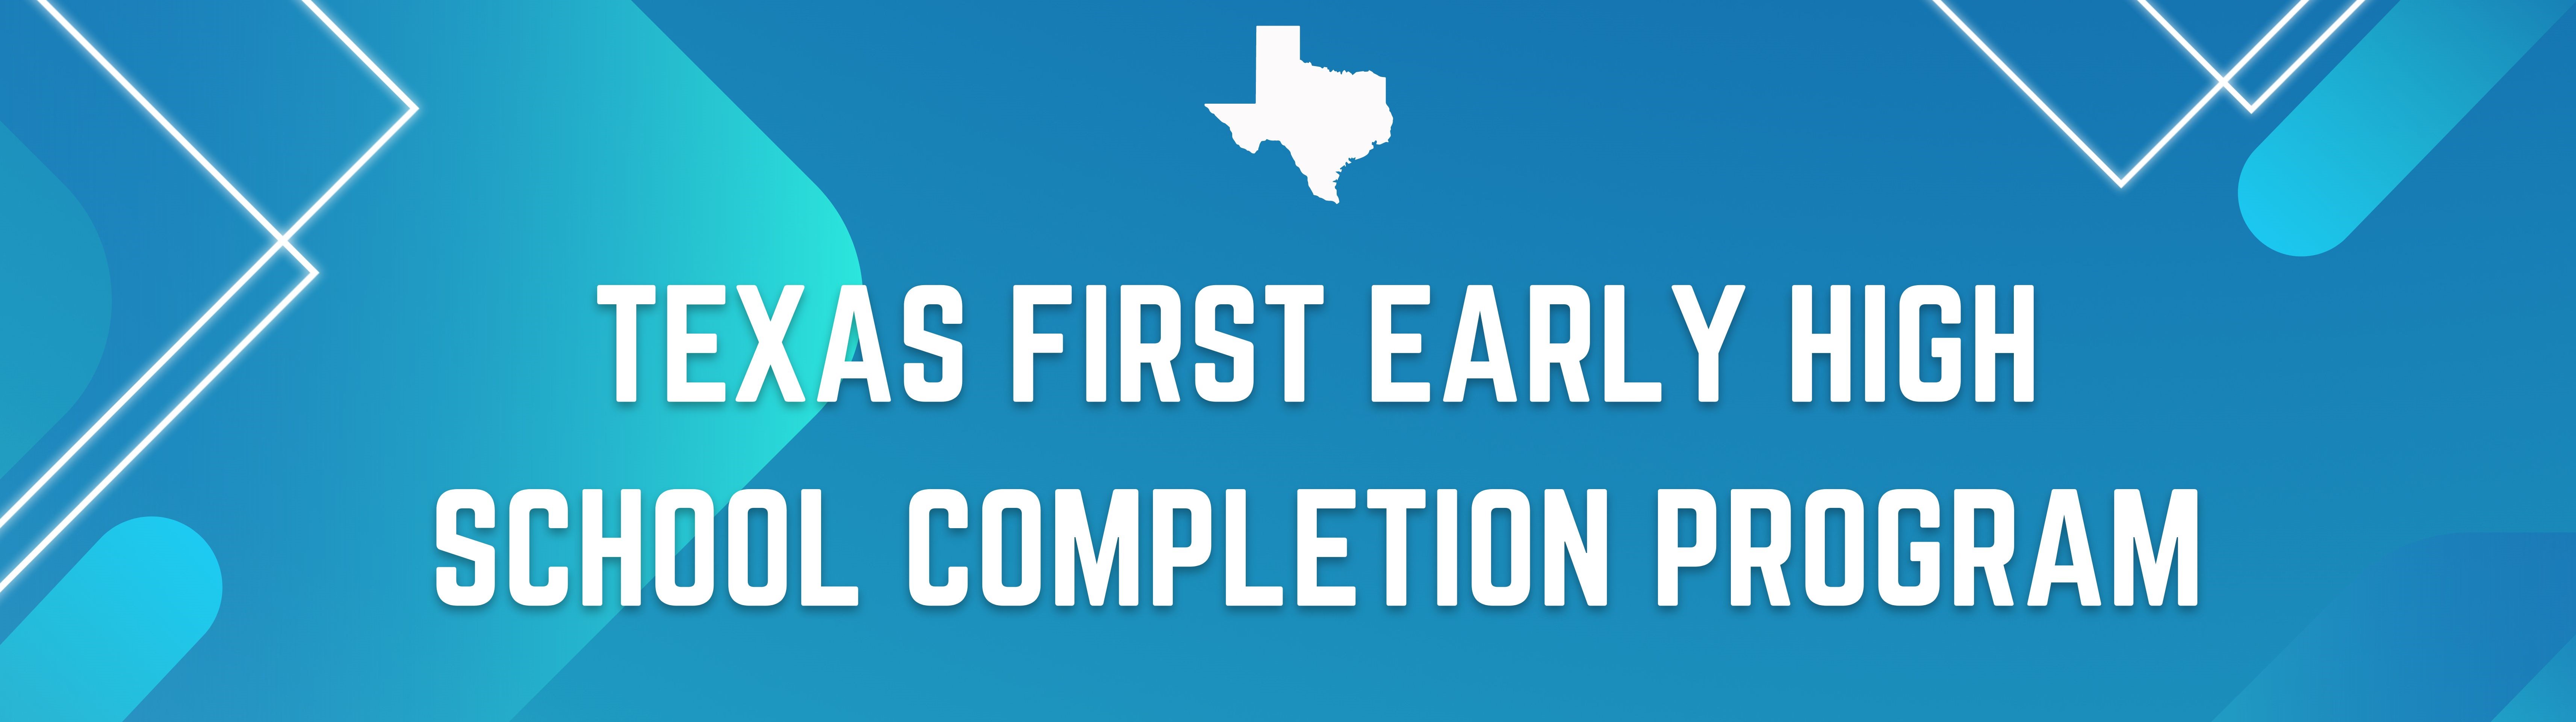 Texas First Early High School Completion Program